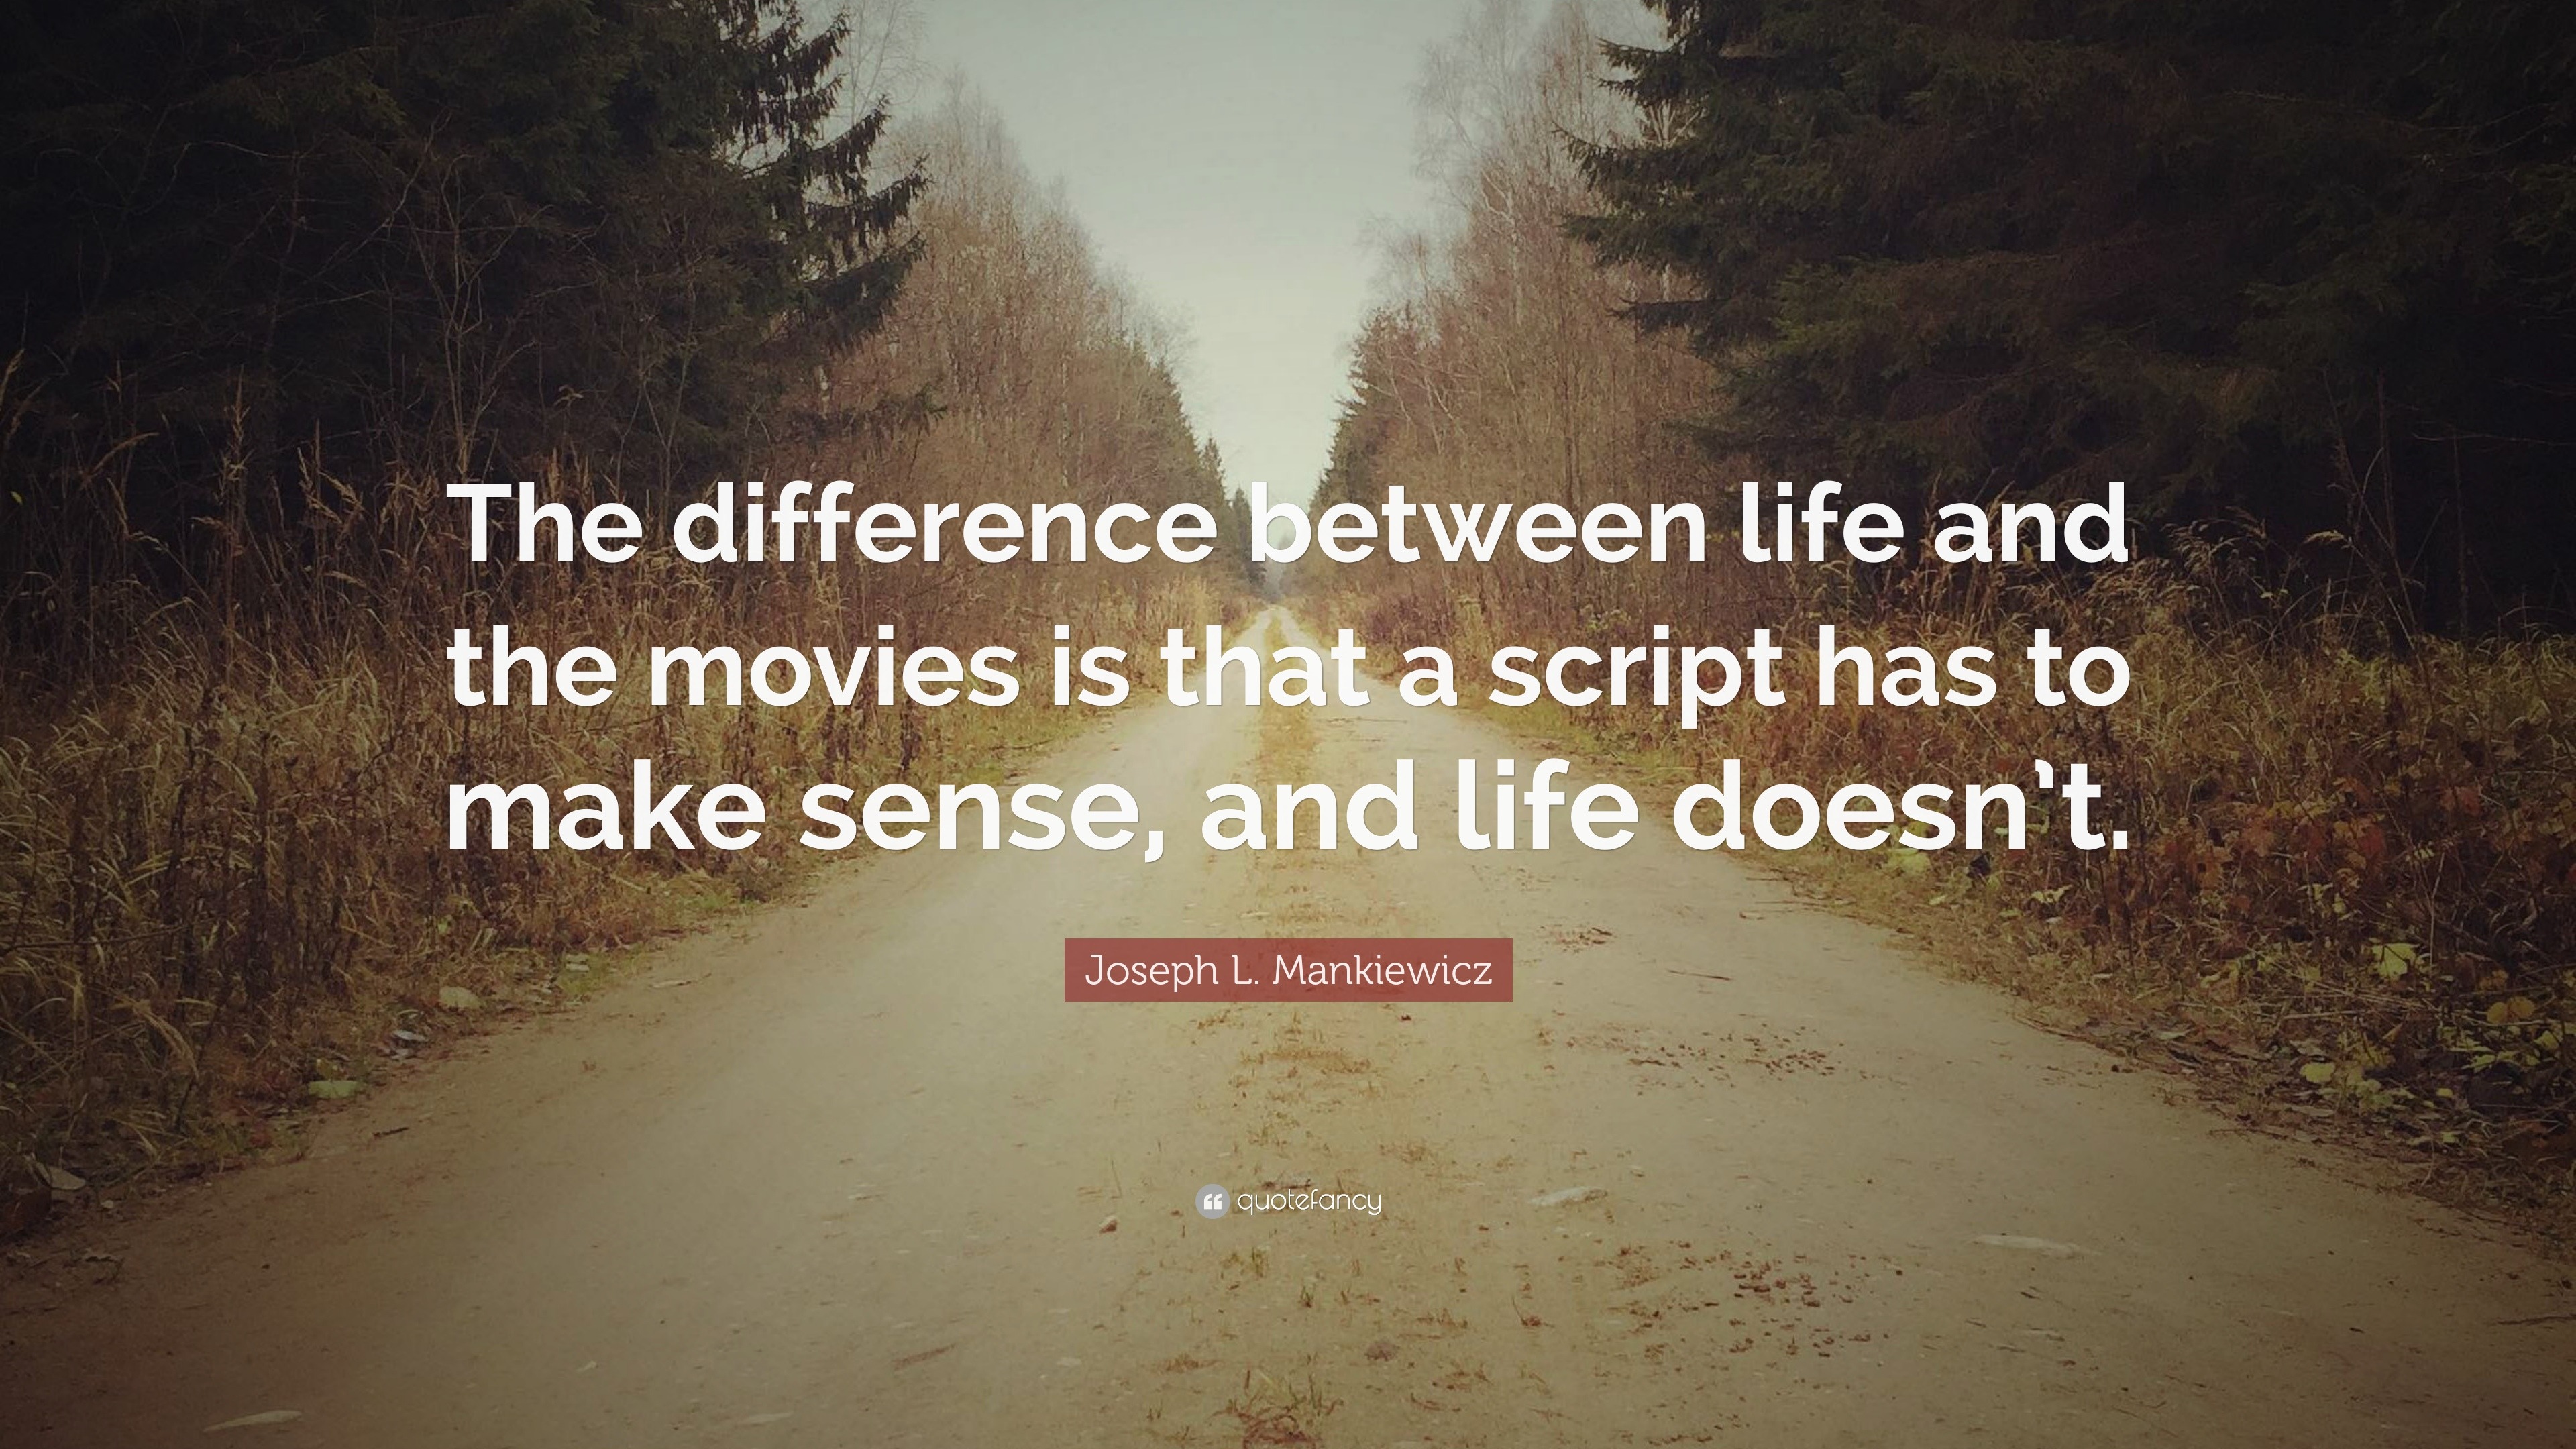 Joseph L Mankiewicz Quote “The difference between life and the movies is that